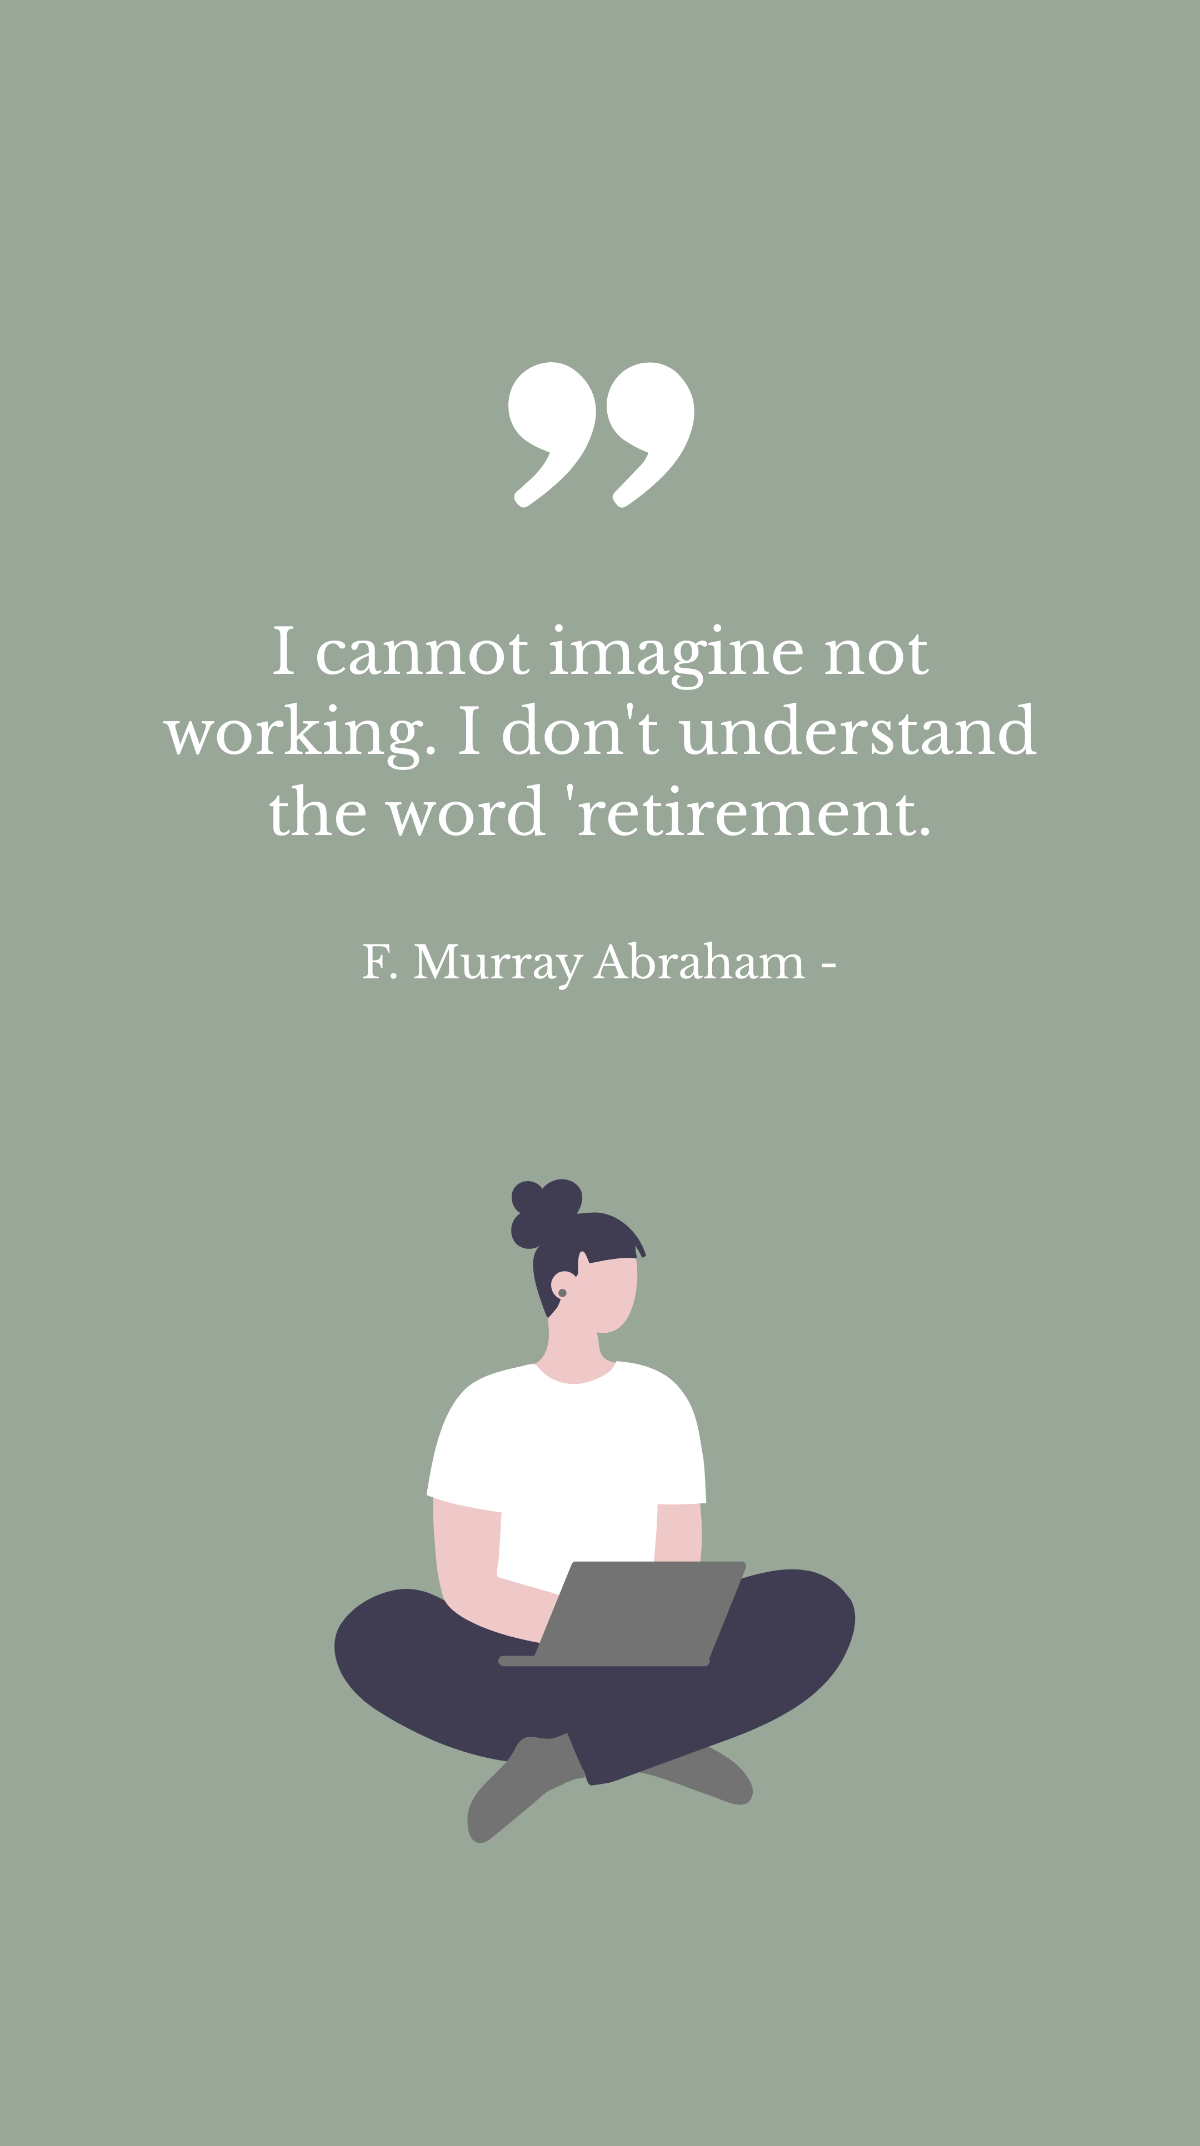 F. Murray Abraham - I cannot imagine not working. I don't understand the word 'retirement. Template